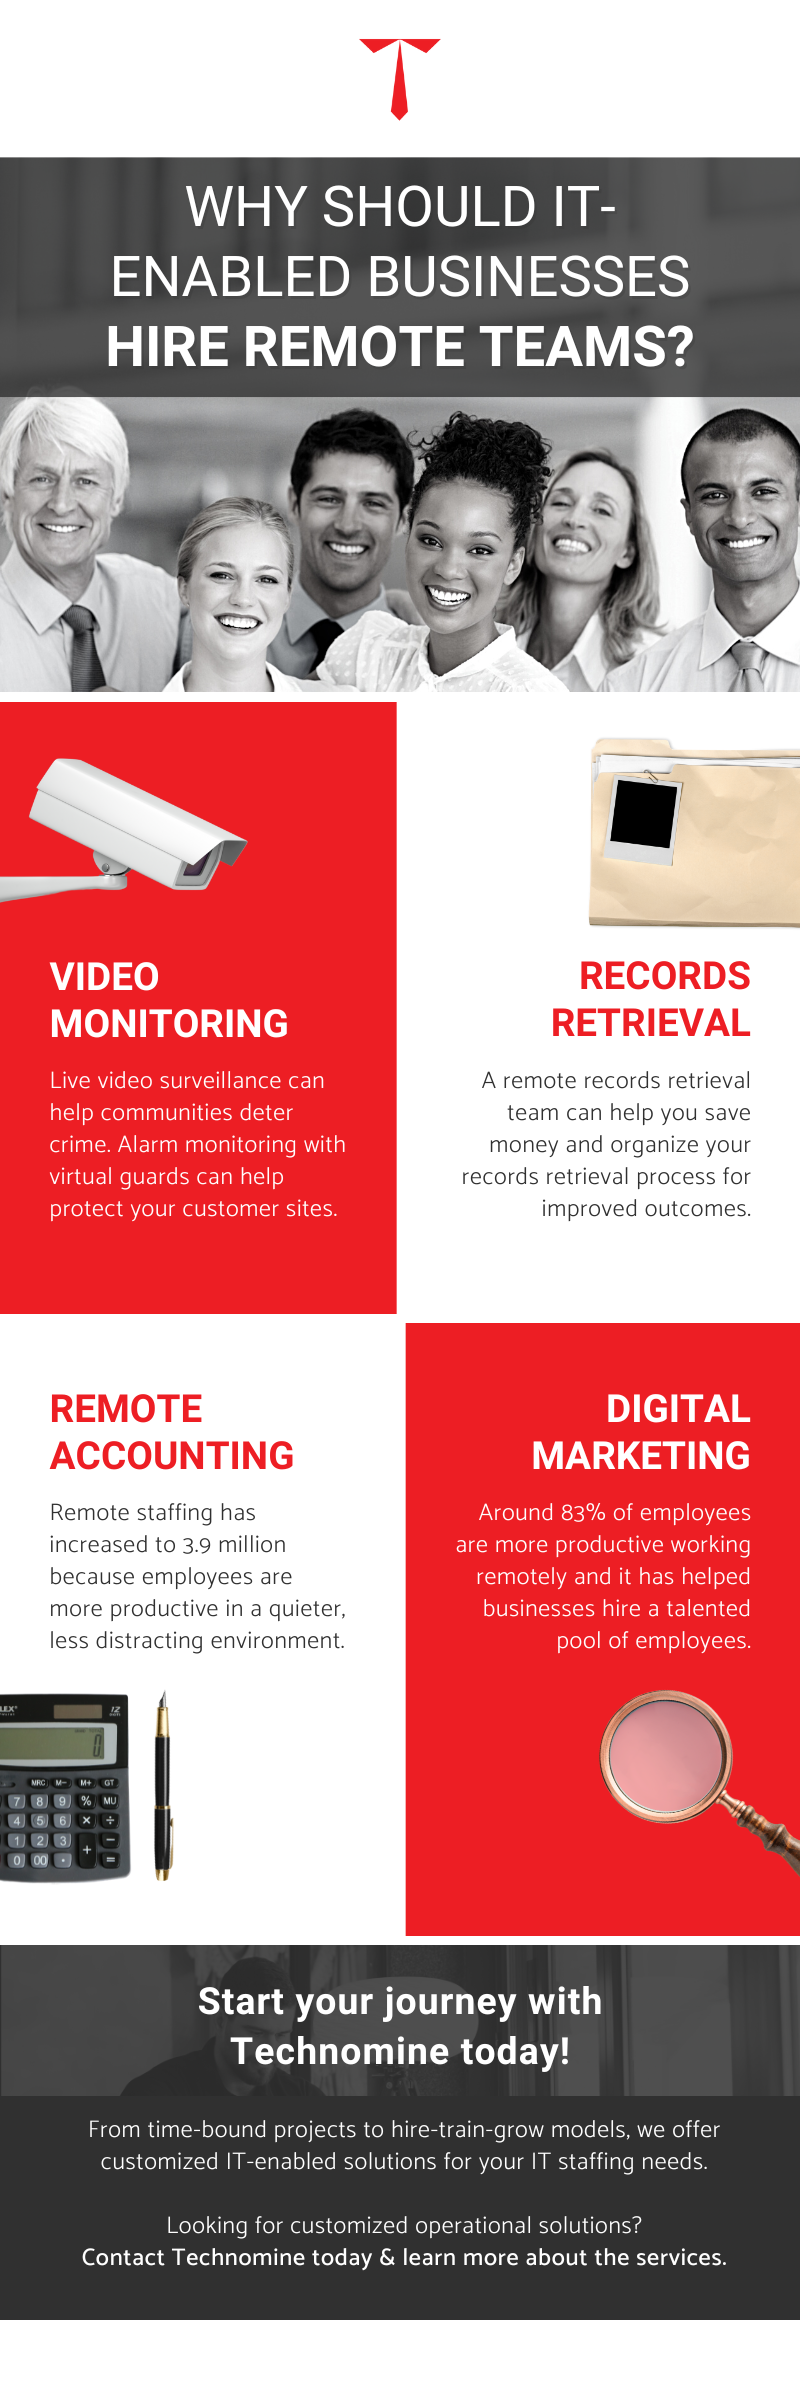 Why should IT-enabled businesses hire remote teams? infographic